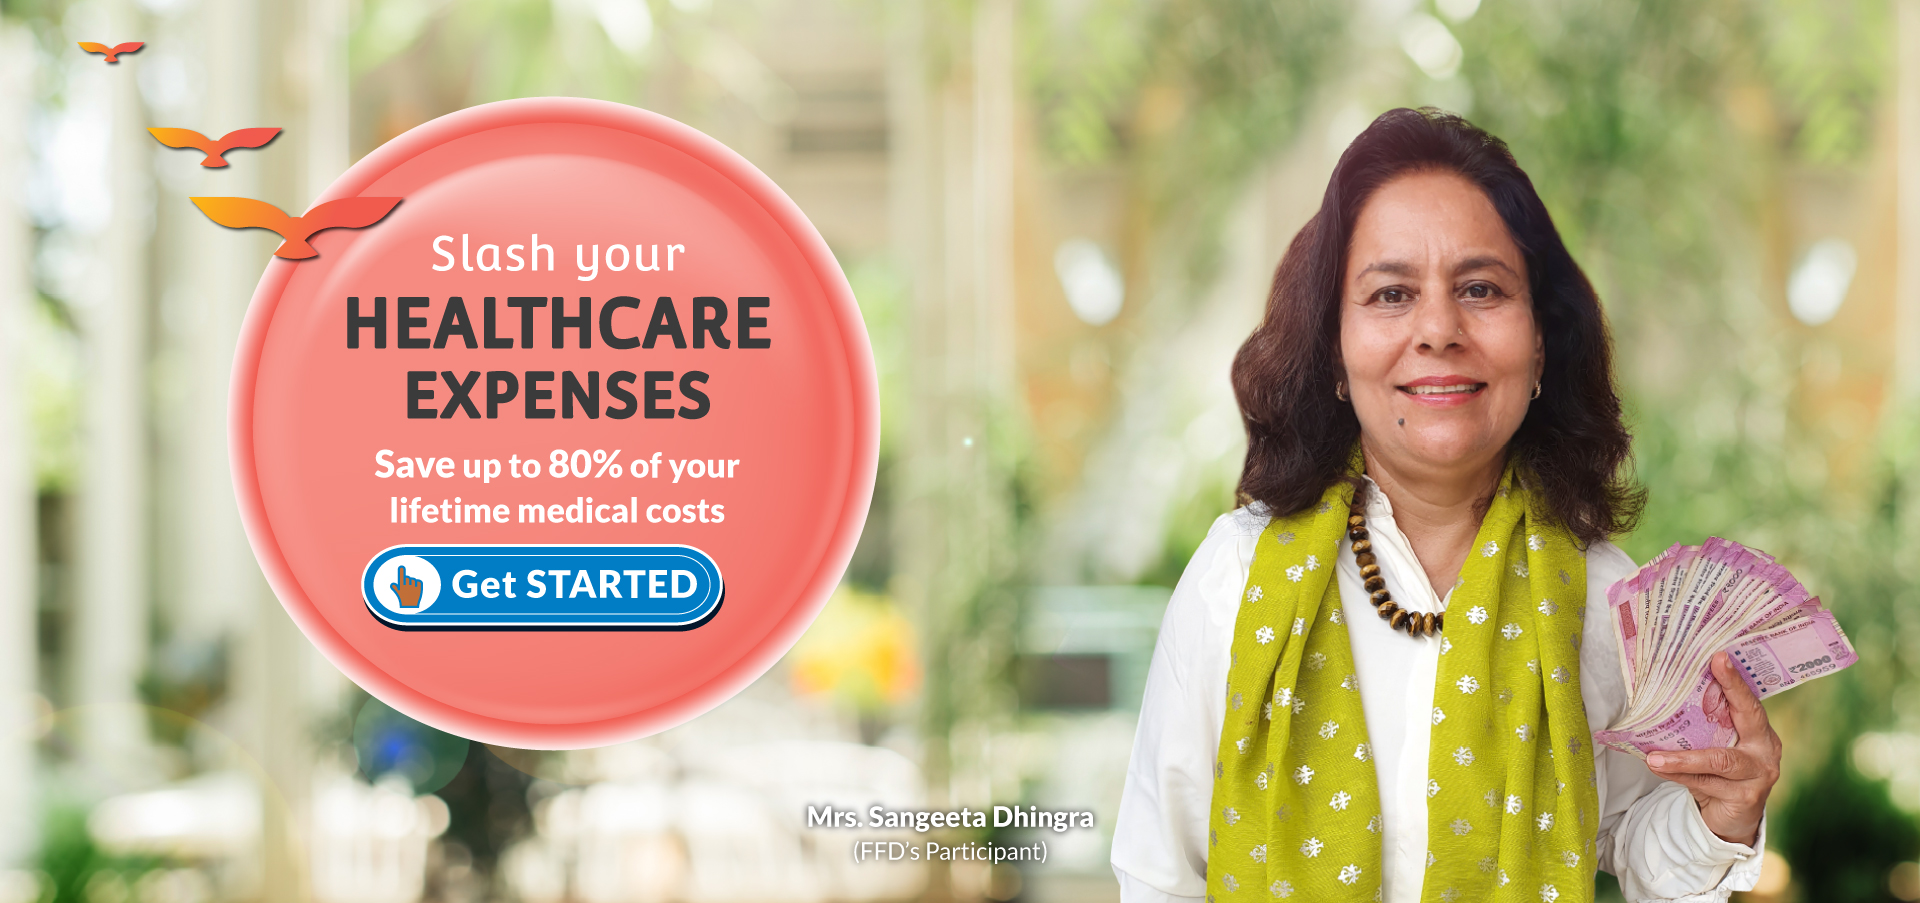 Slash your healthcare expenses, save 80%